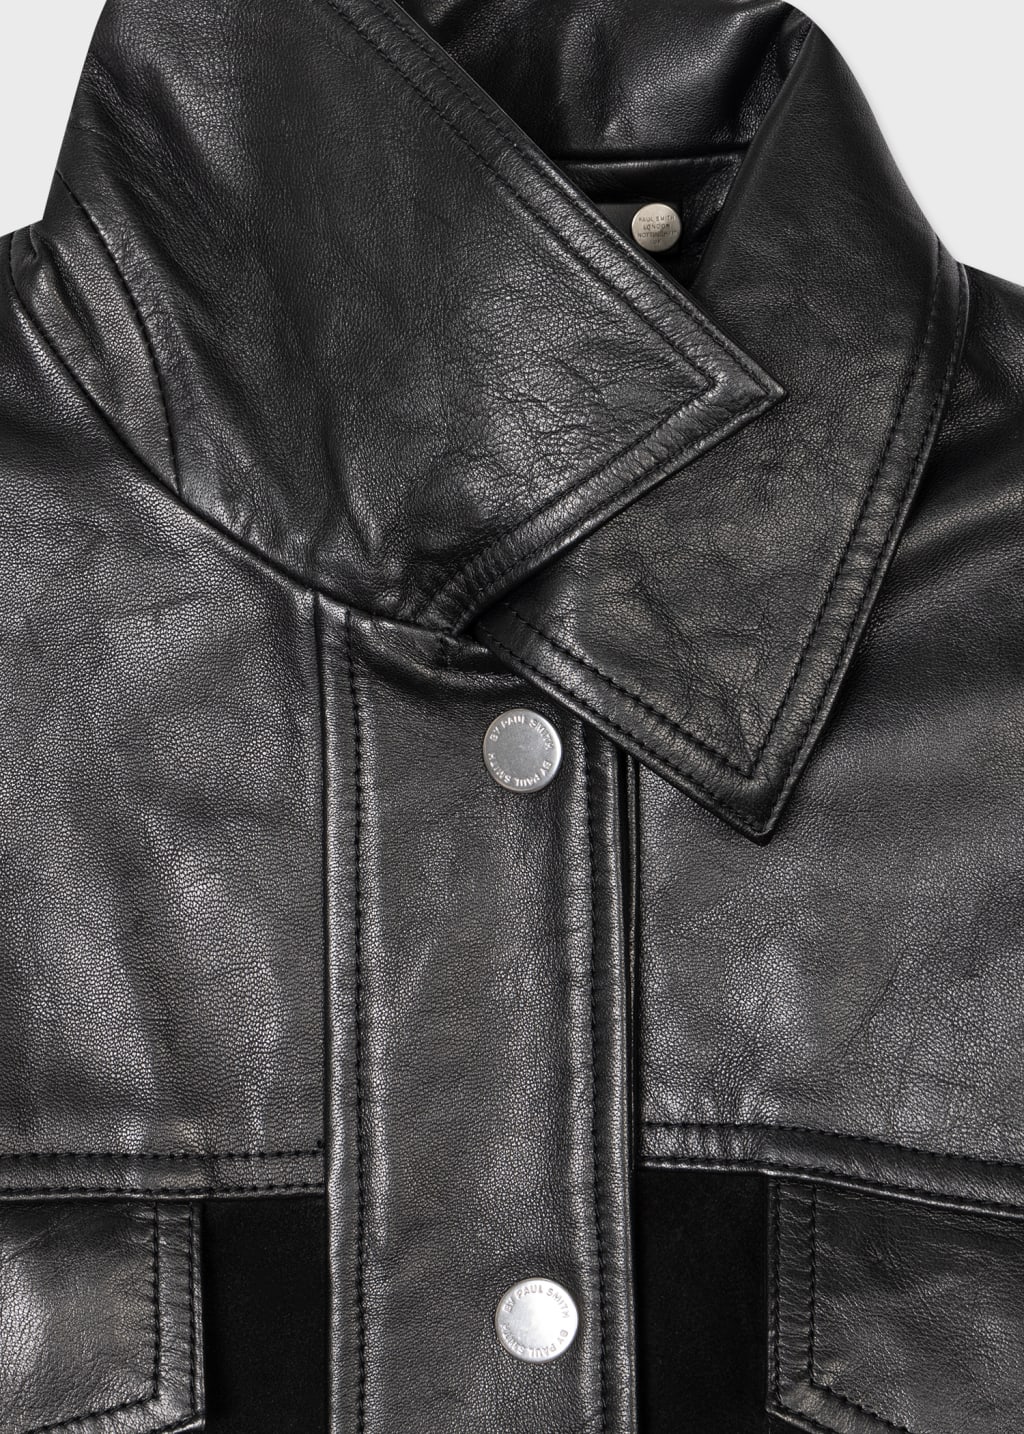 Product View - Women's Black Leather & Suede Contrasting Western Jacket by Paul Smith